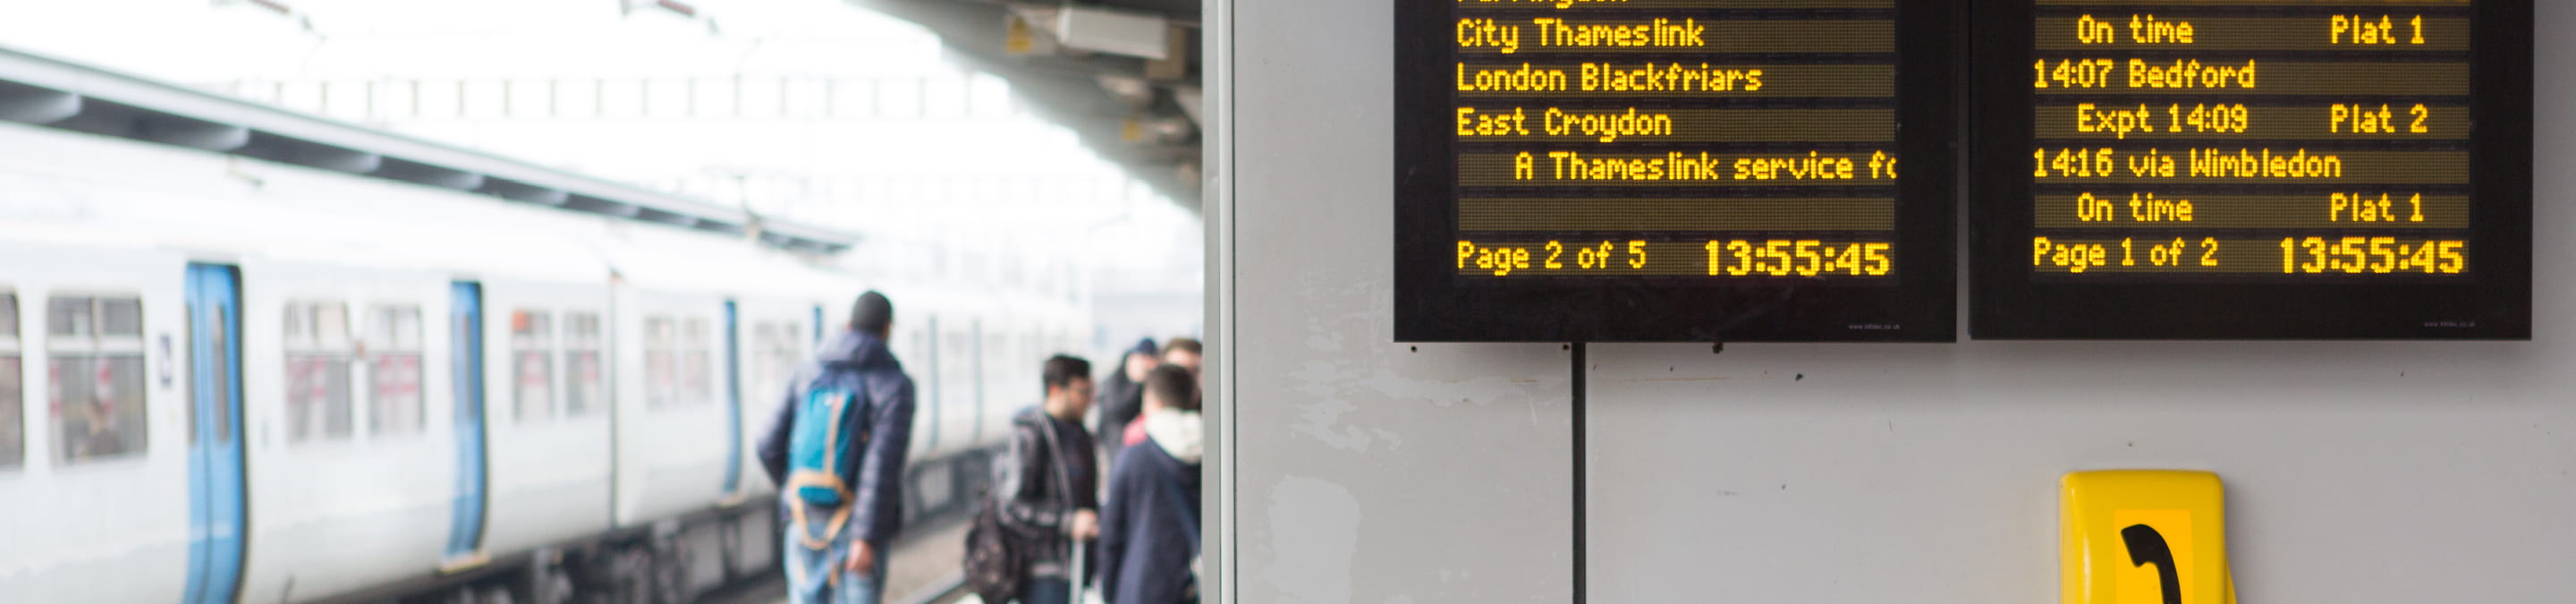 Addresses, facilities, opening times and more for every Thameslink station.